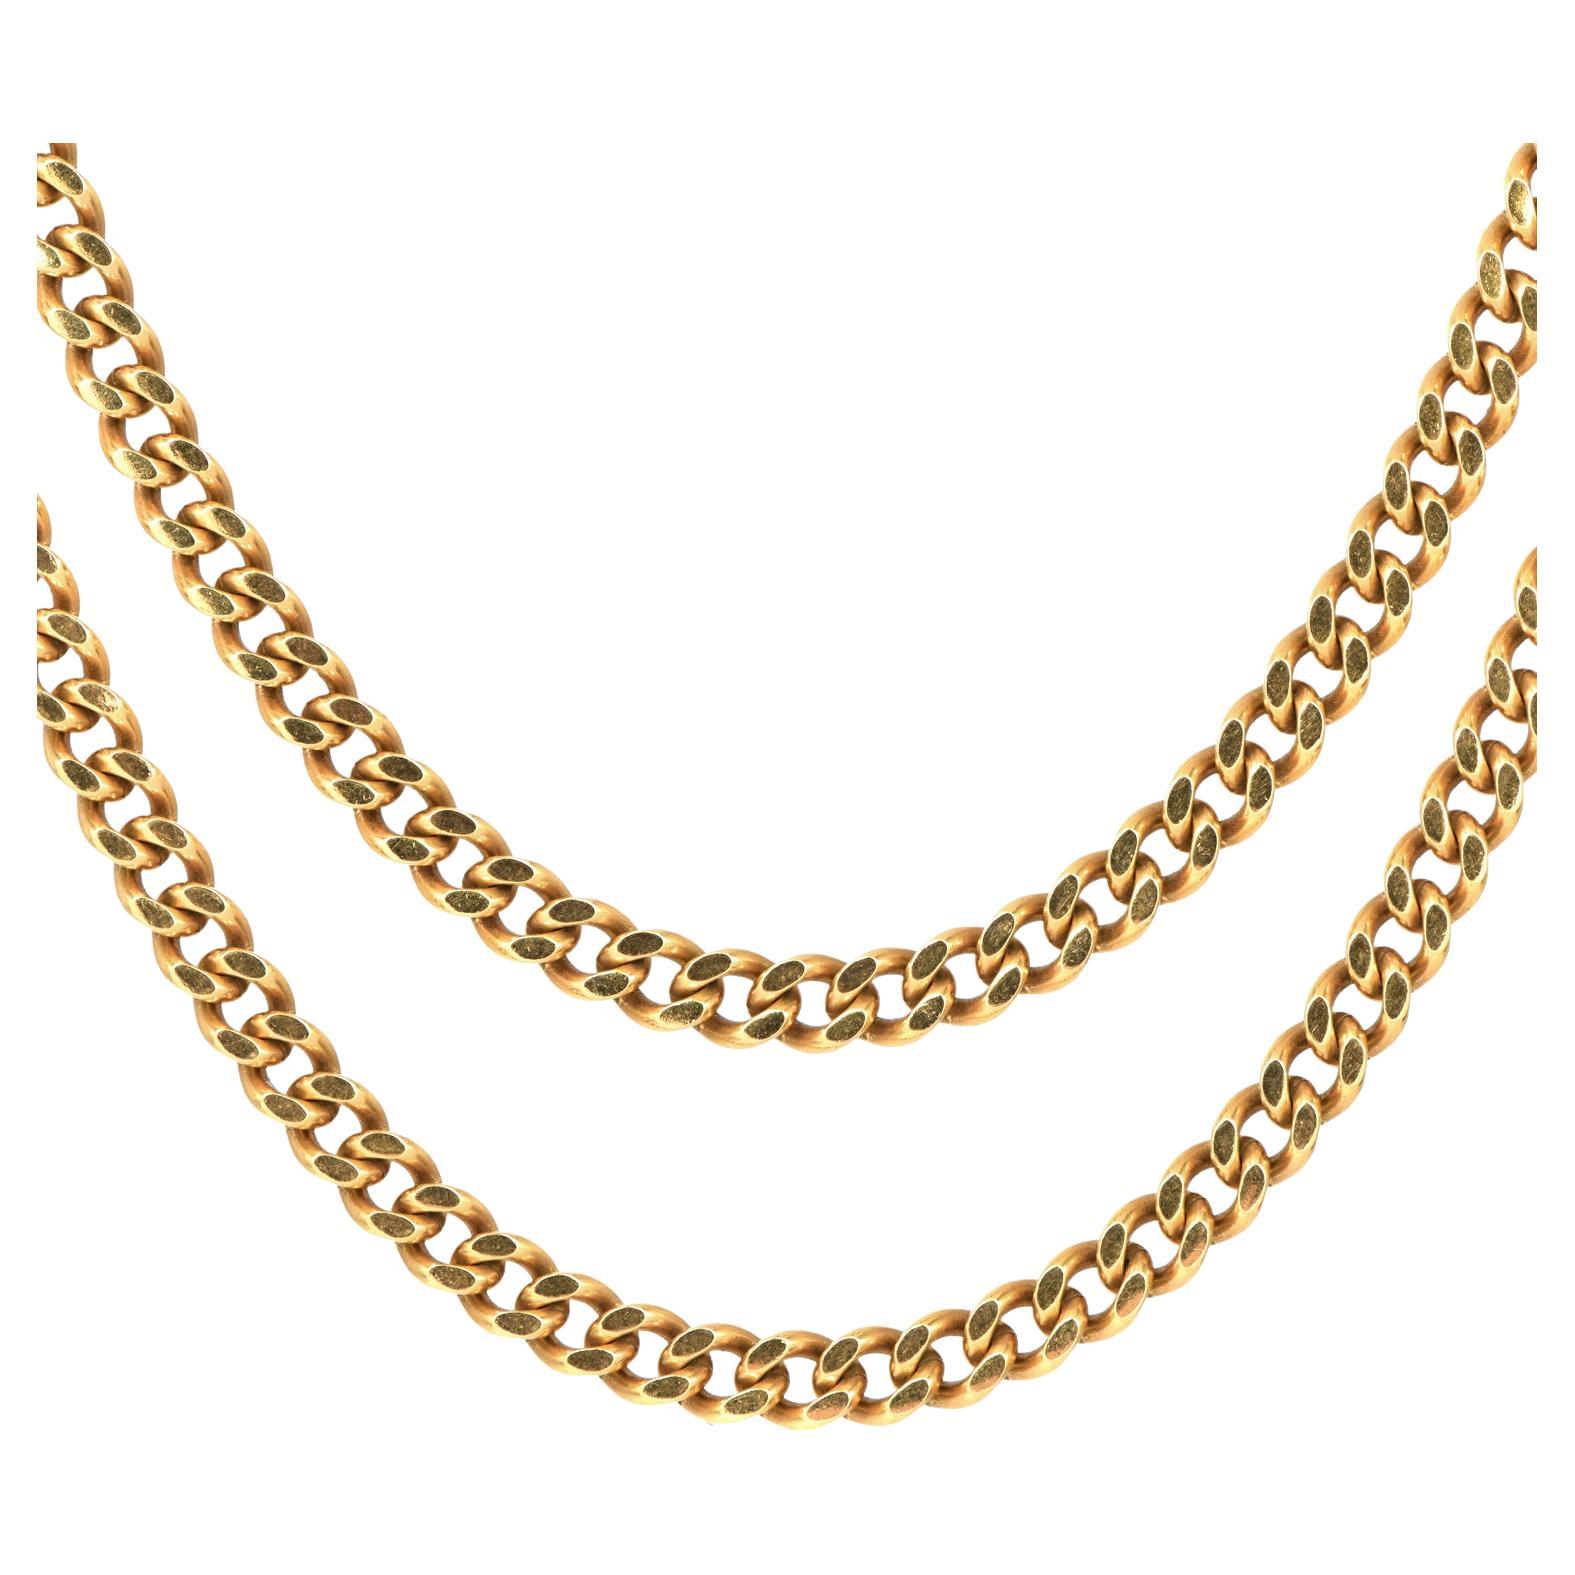 1960s Solid 18K Yellow Gold Curb Link Chain Necklace